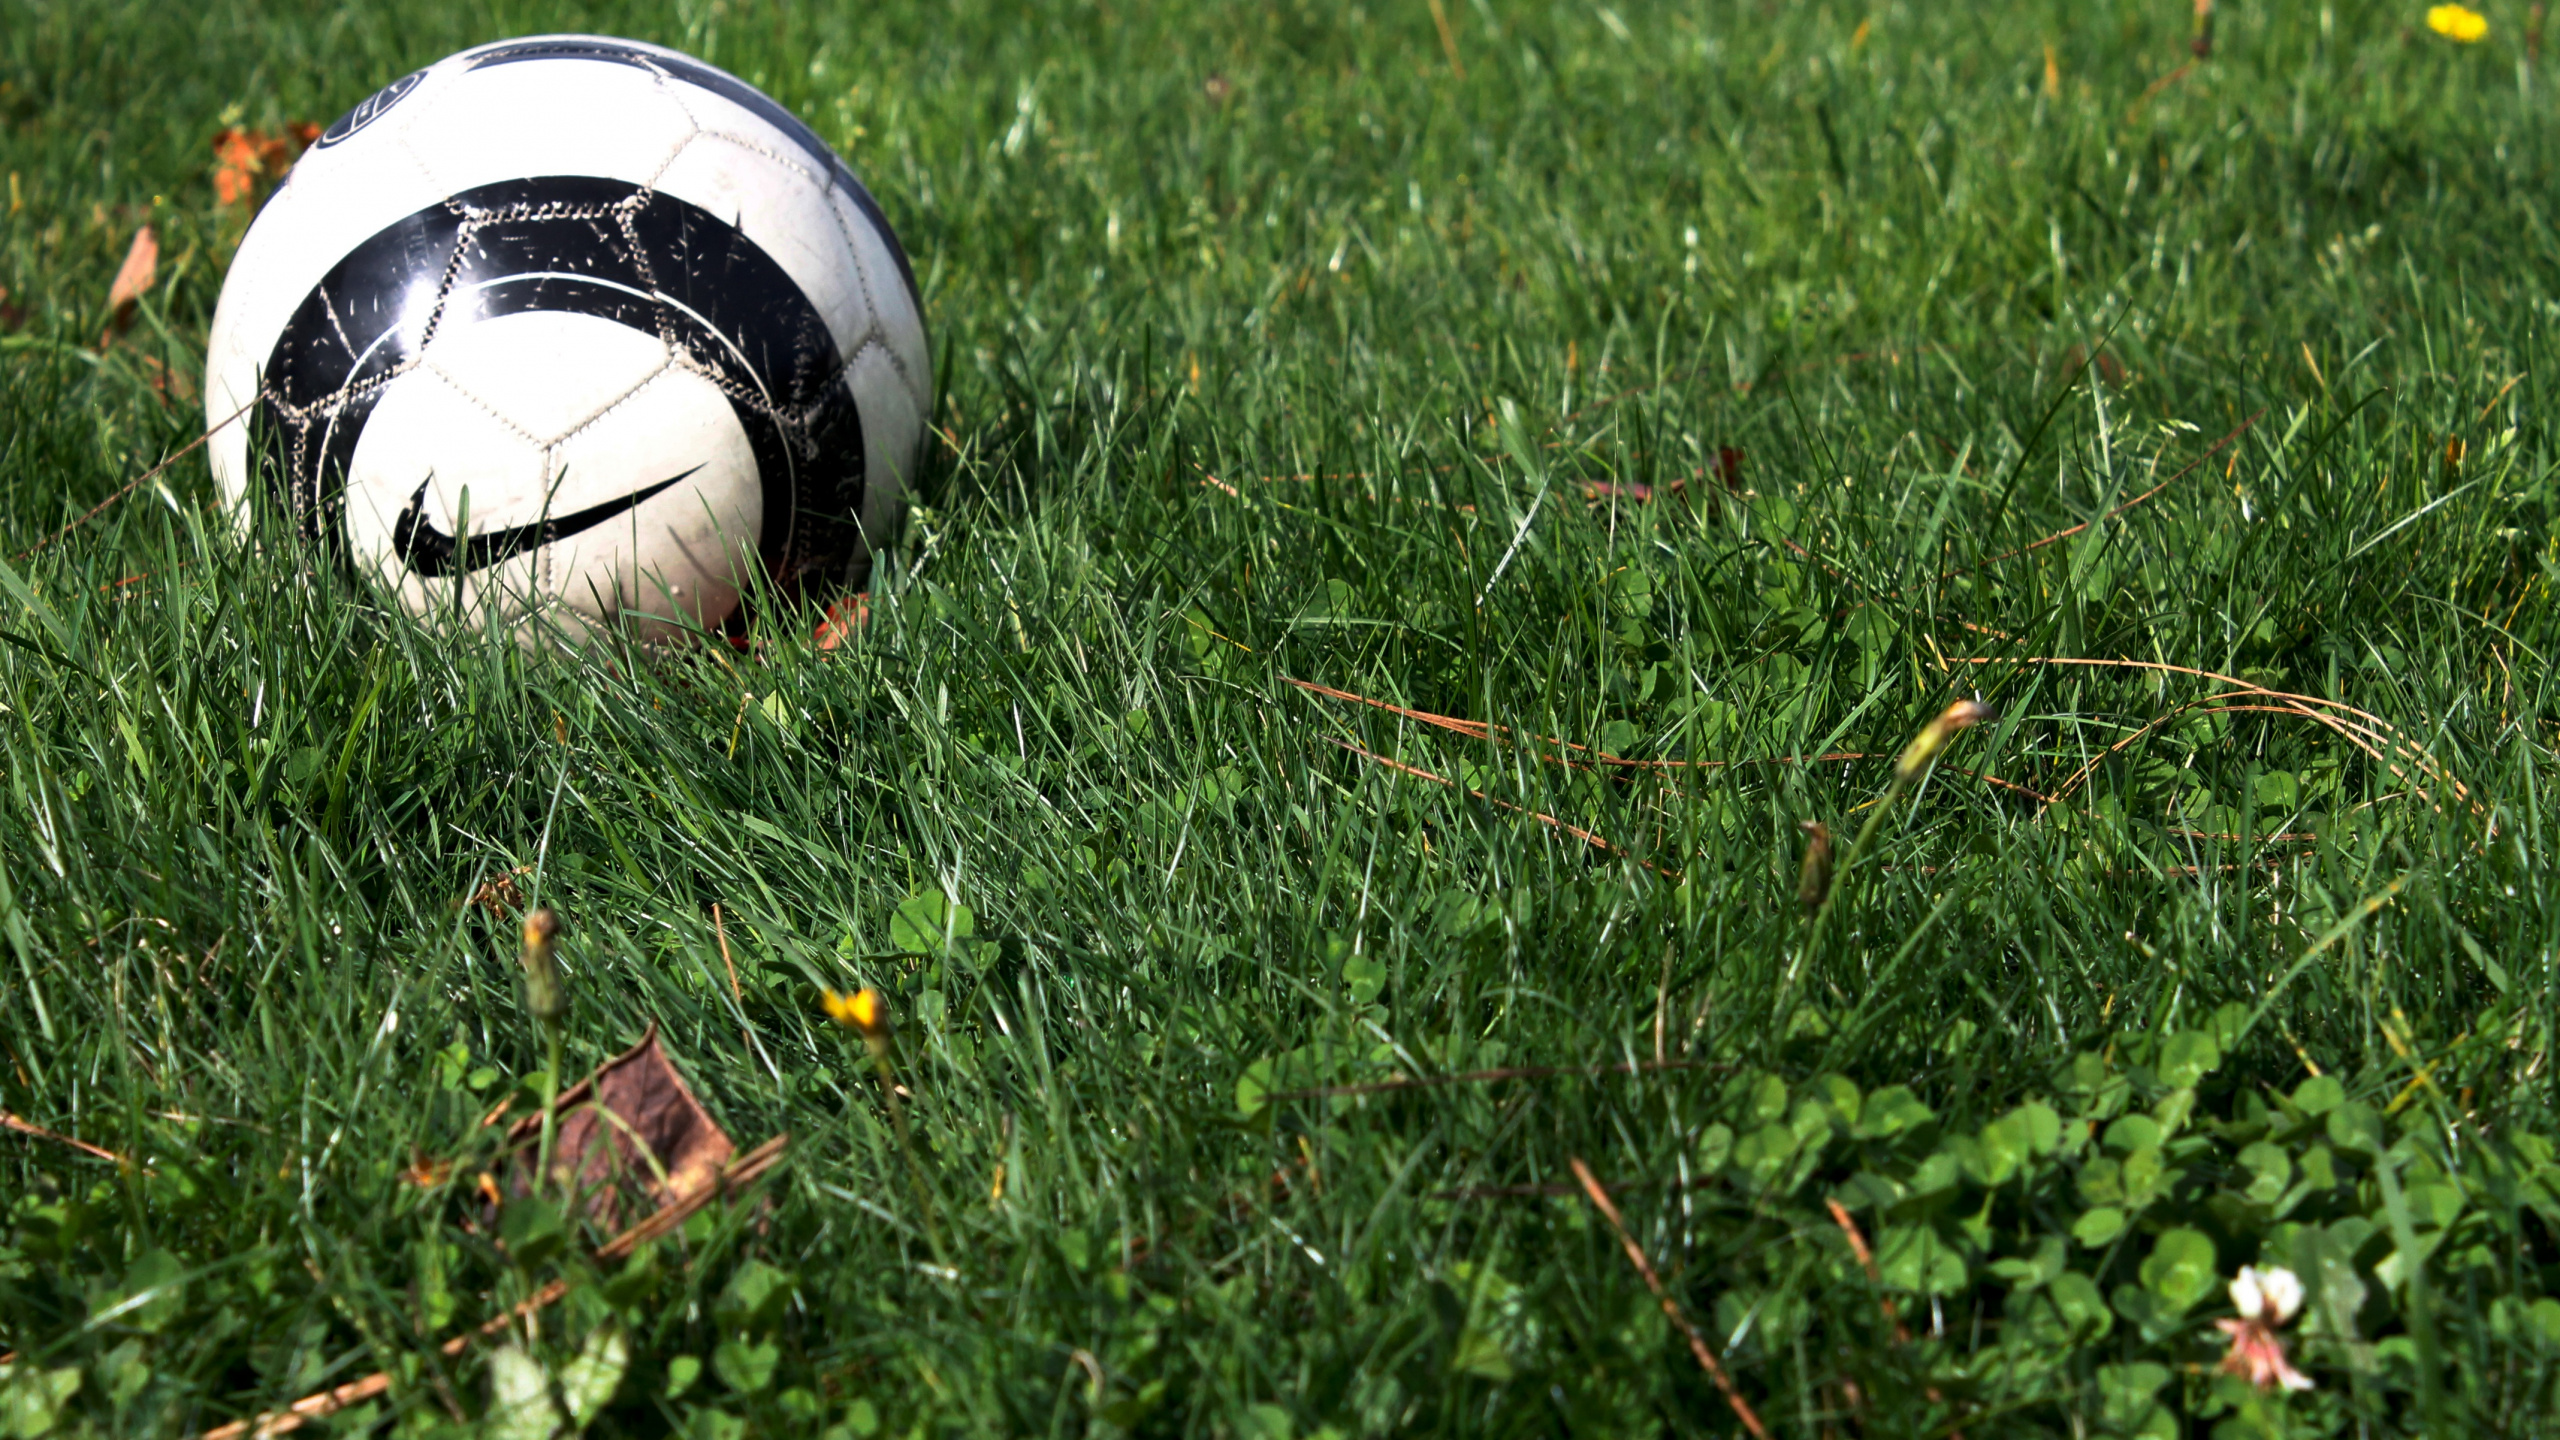 White and Black Soccer Ball on Green Grass Field. Wallpaper in 2560x1440 Resolution